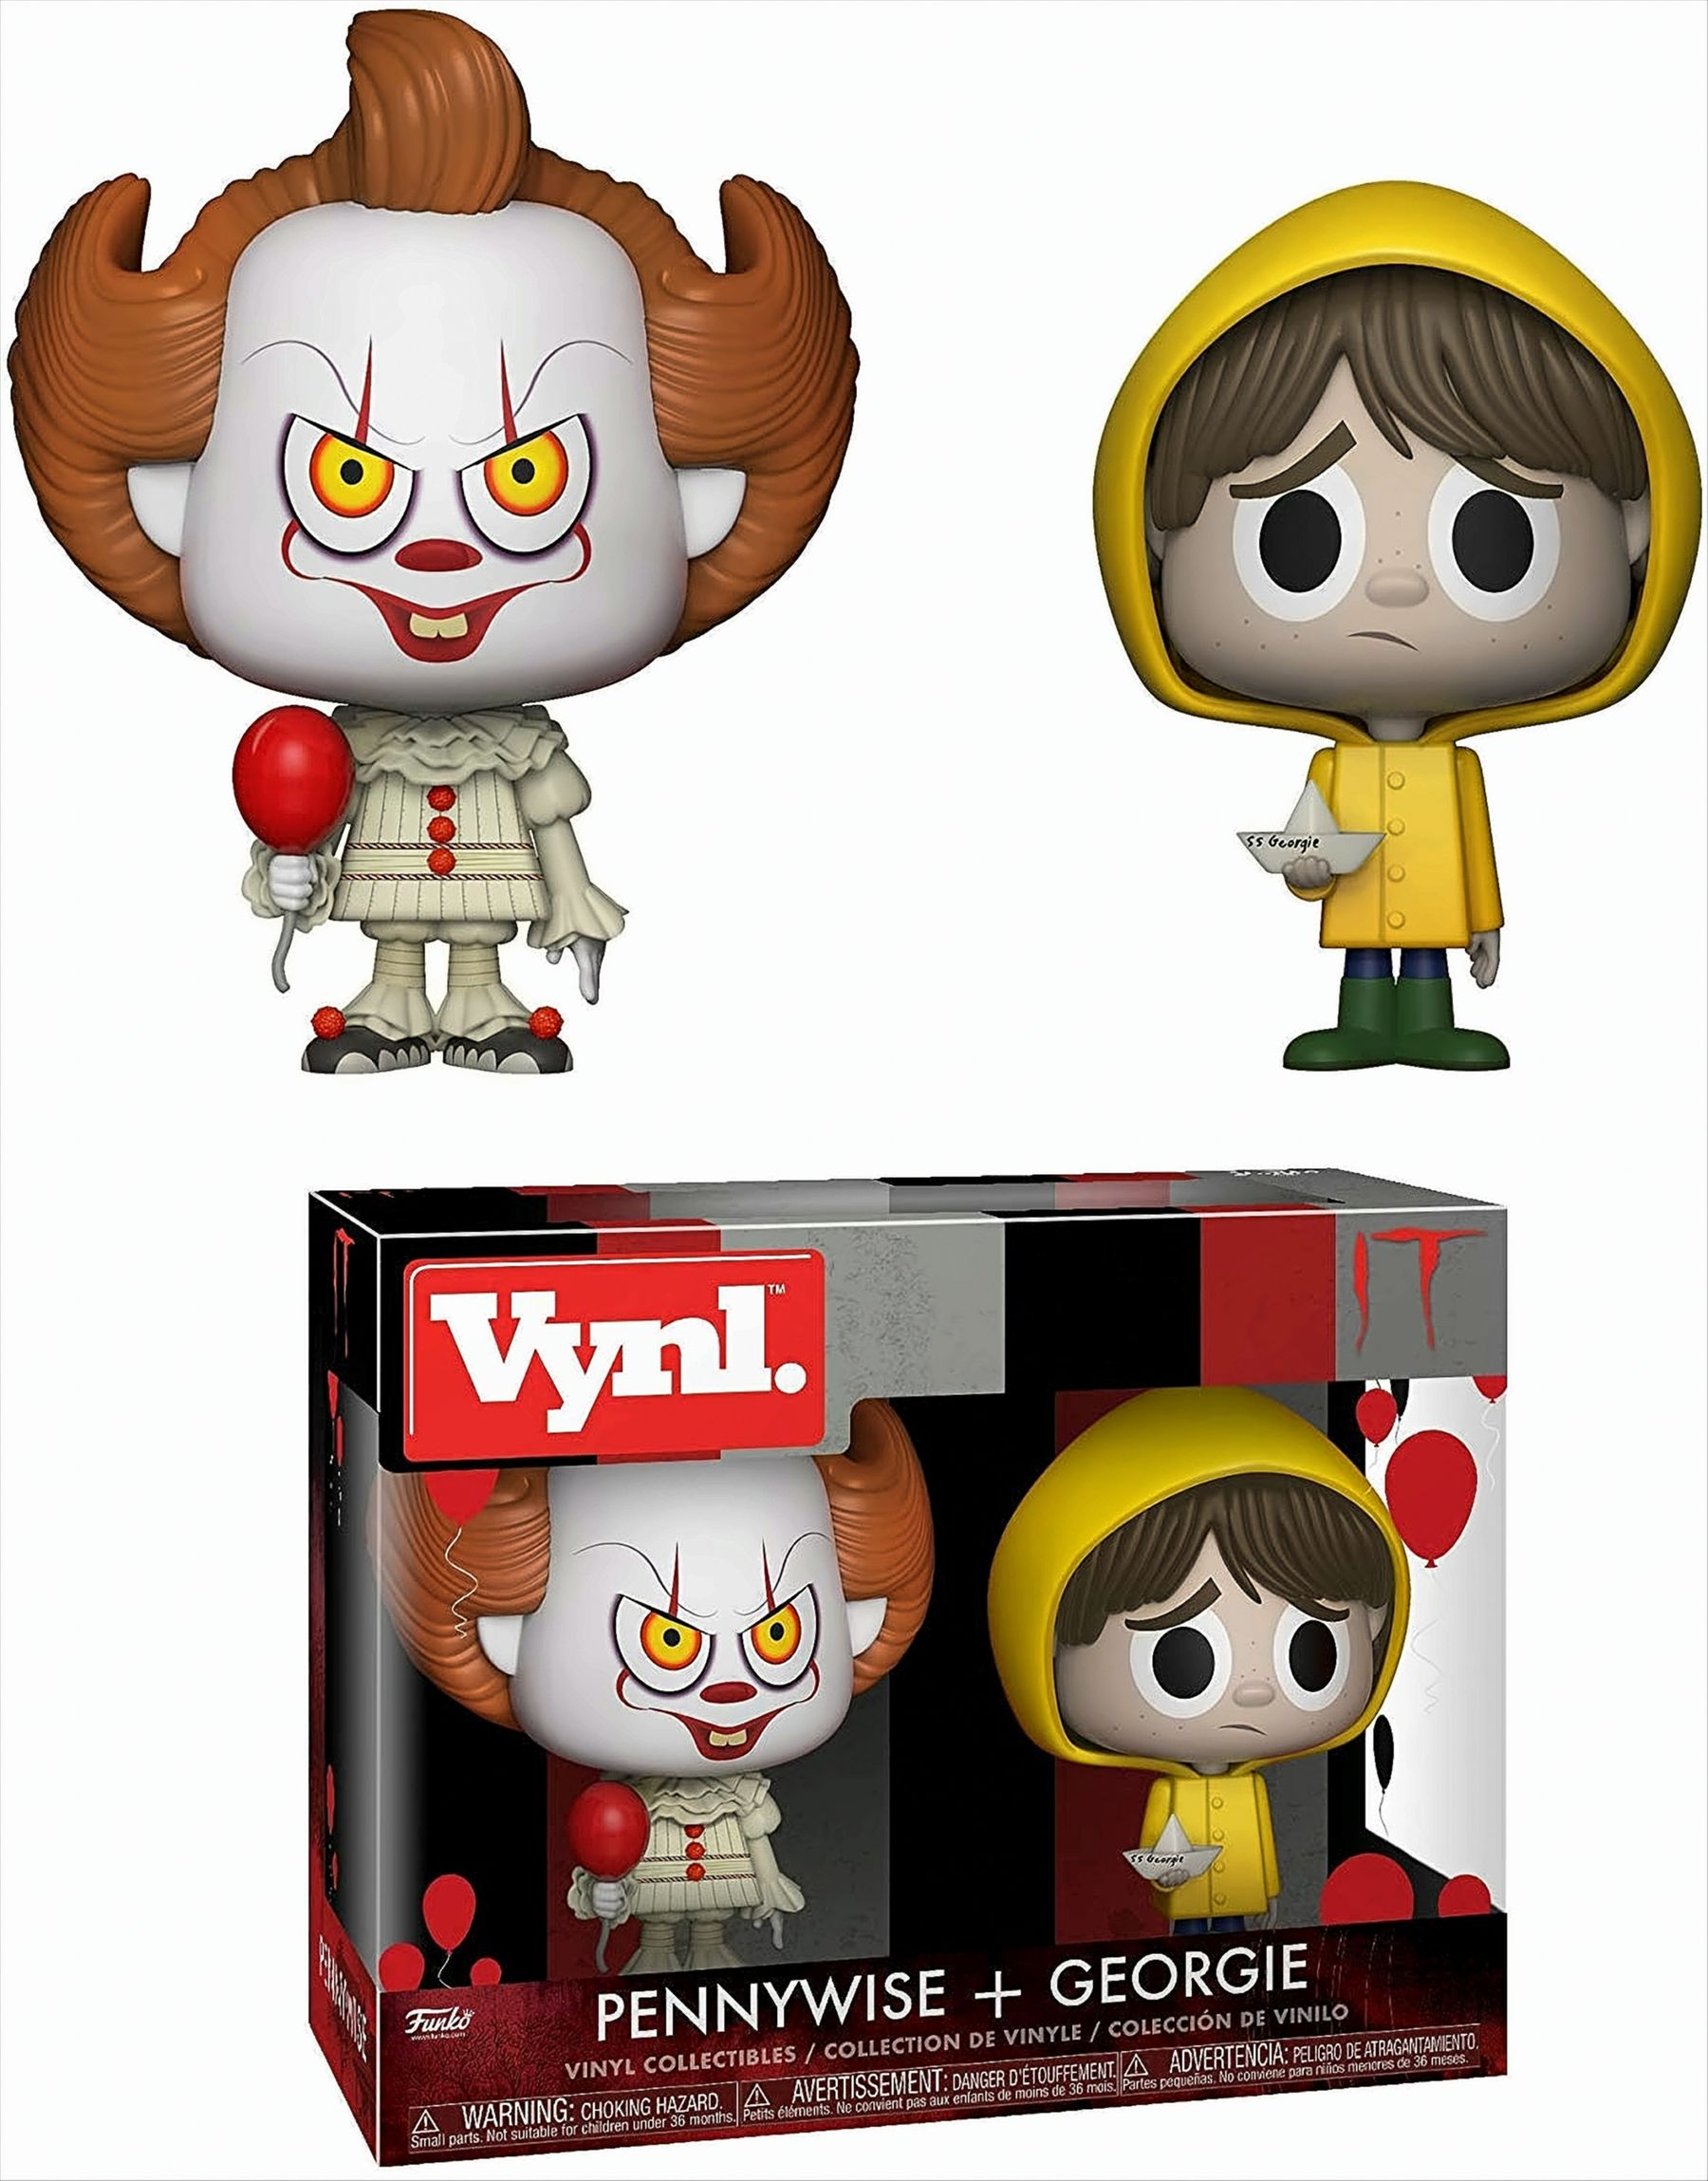 Pennywise VYNL Pack Georgie 2-Fig. - + IT -